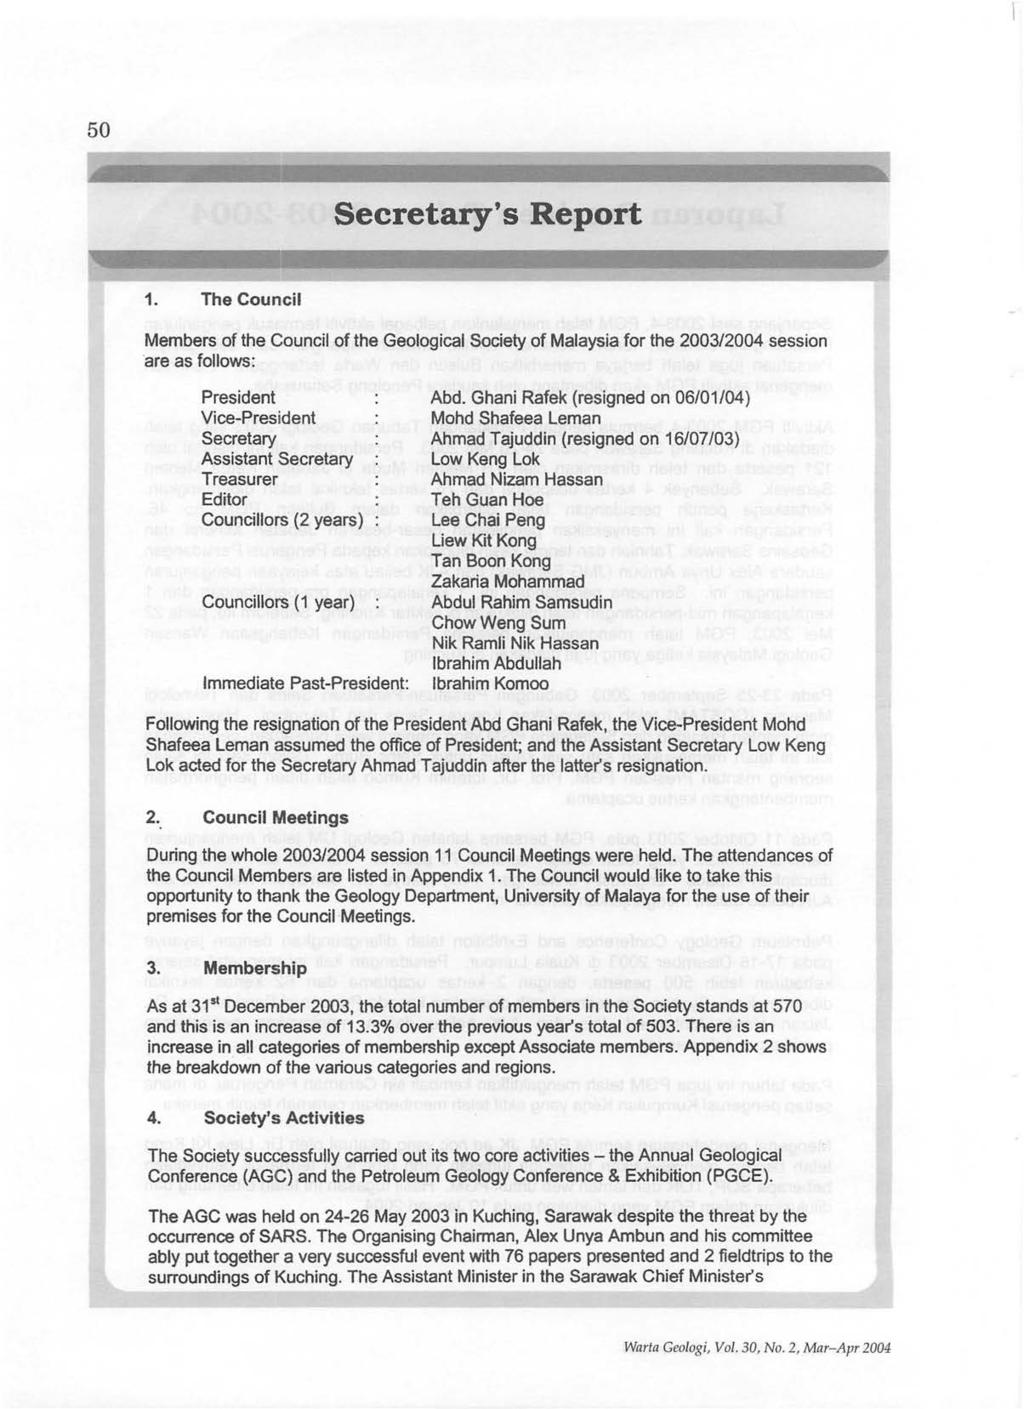 50 Secretary's Report The Council Members of the Council of the Geological Society of Malaysia for the 2003/2004 session are as follows: President Vice-President Secretary Assistant Secretary